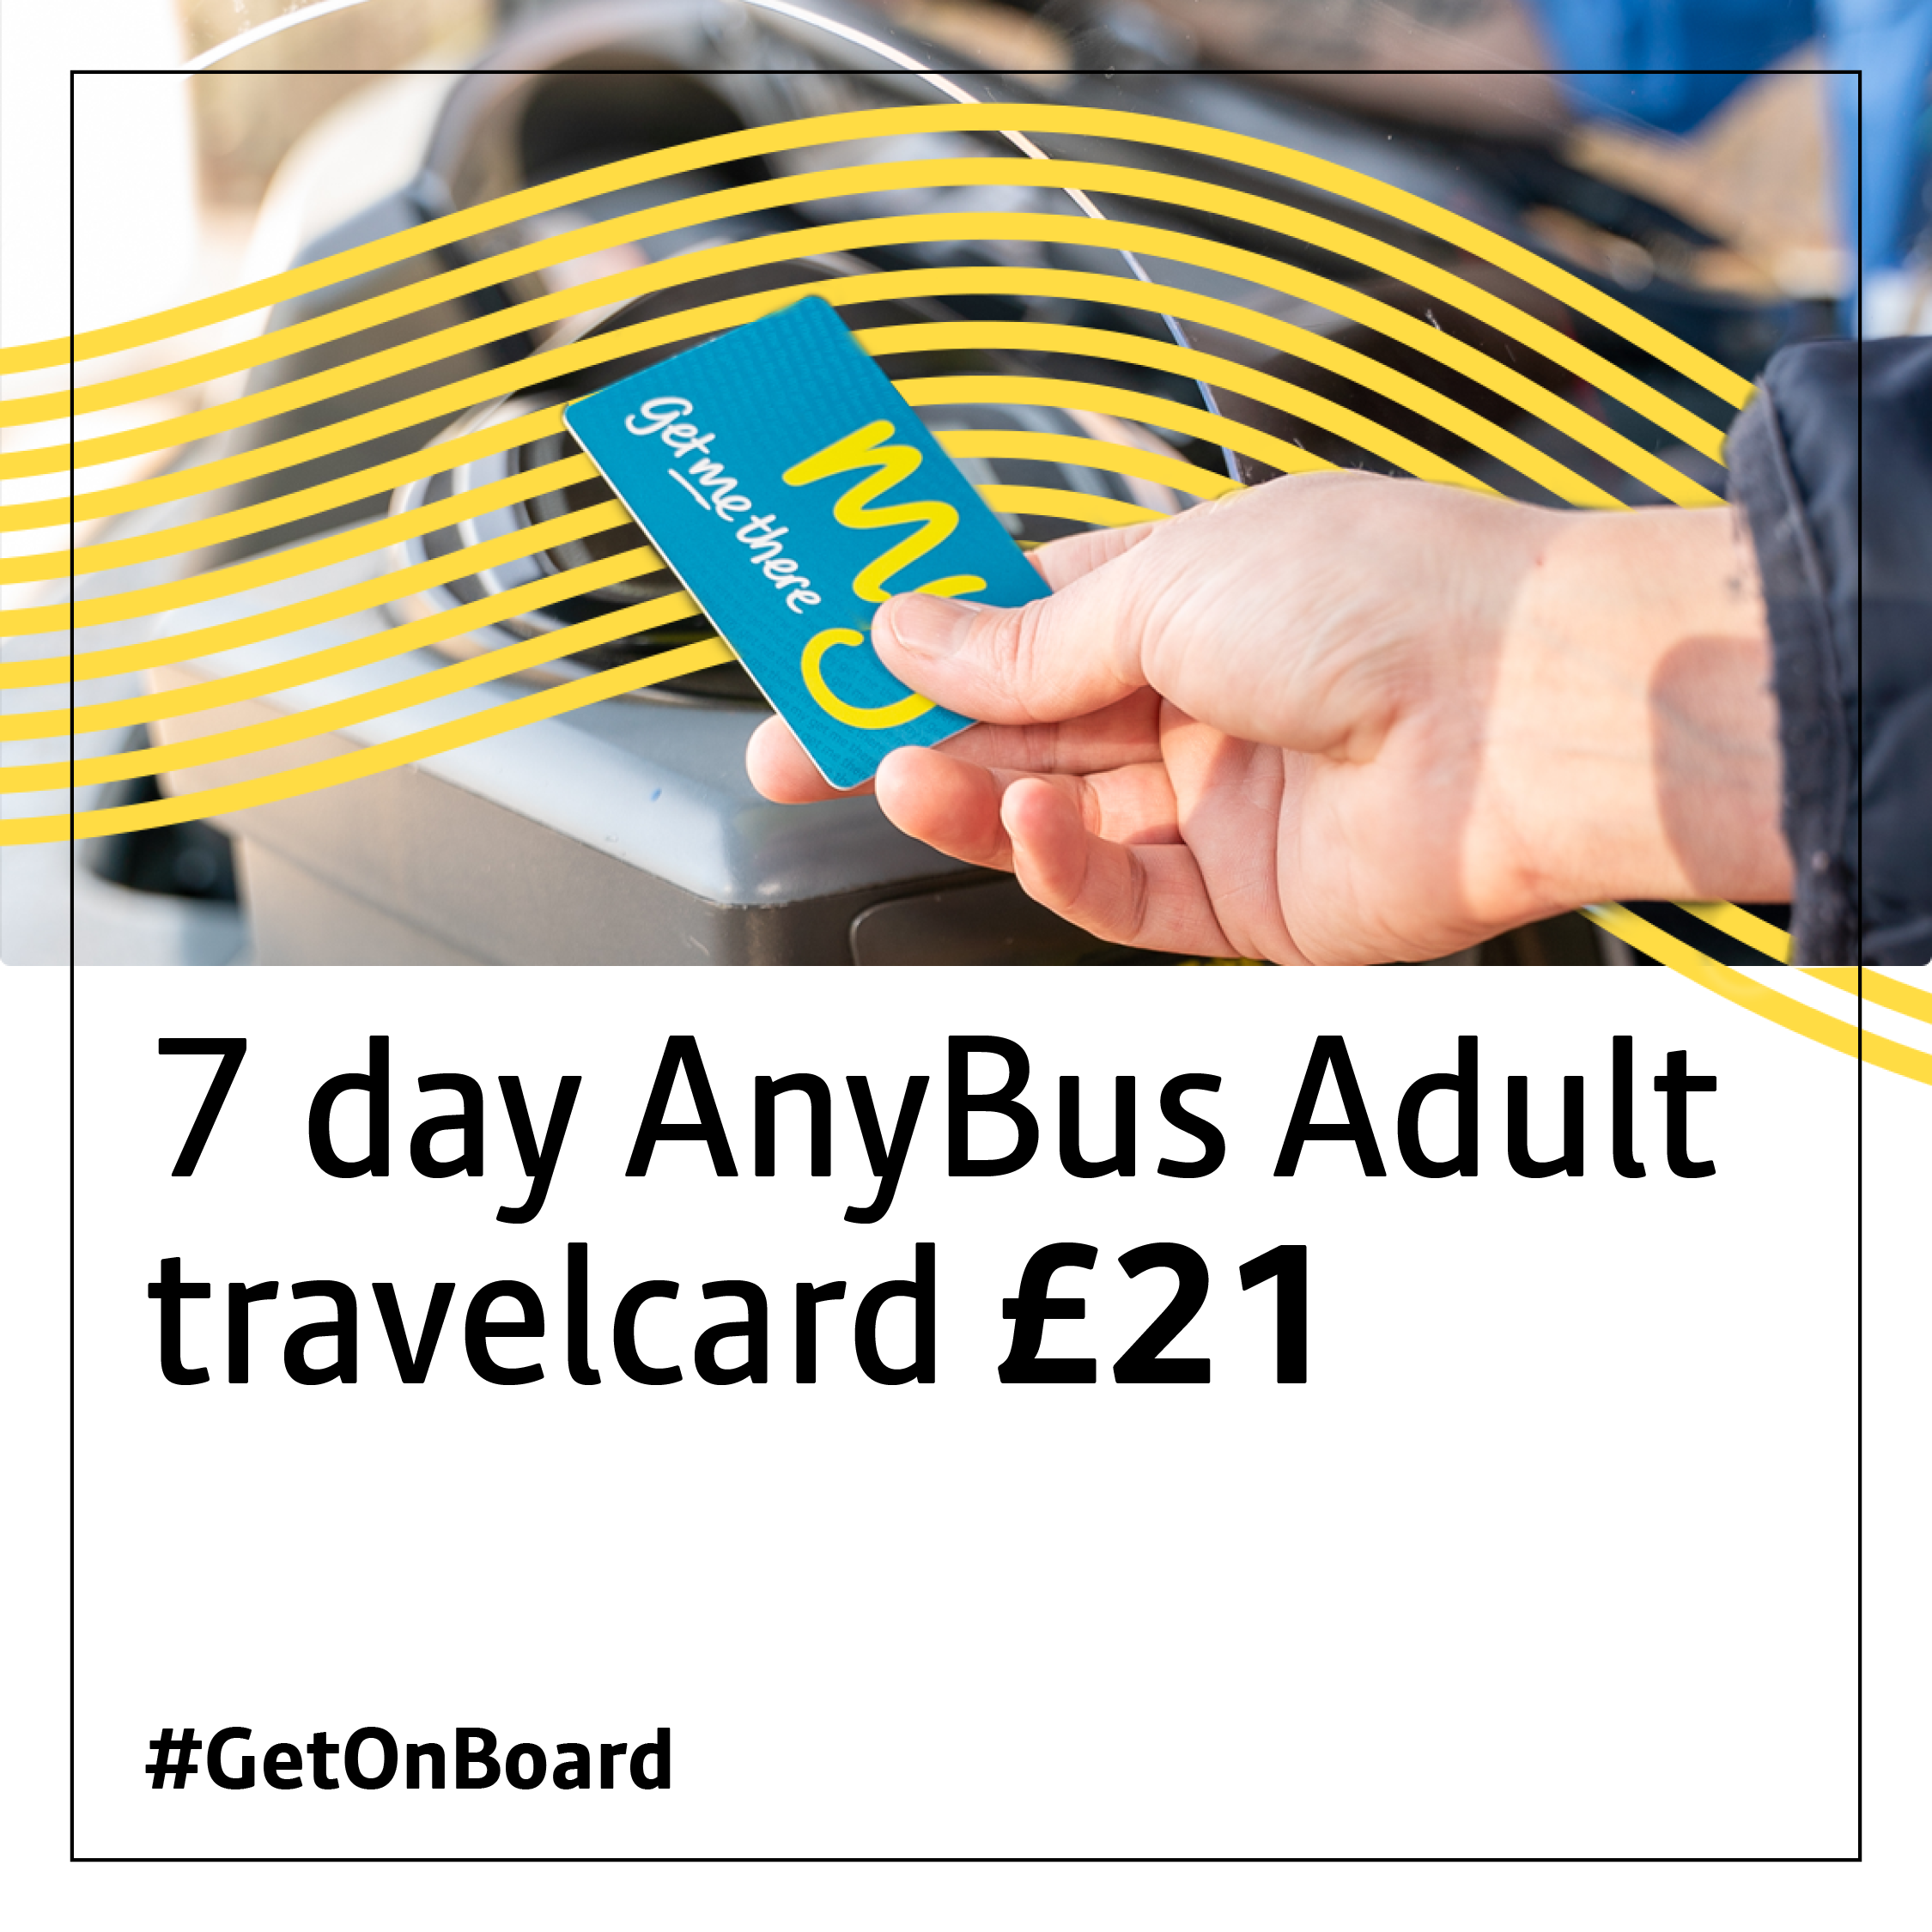 7 Day any bus Adult travel card for 21 Pounds